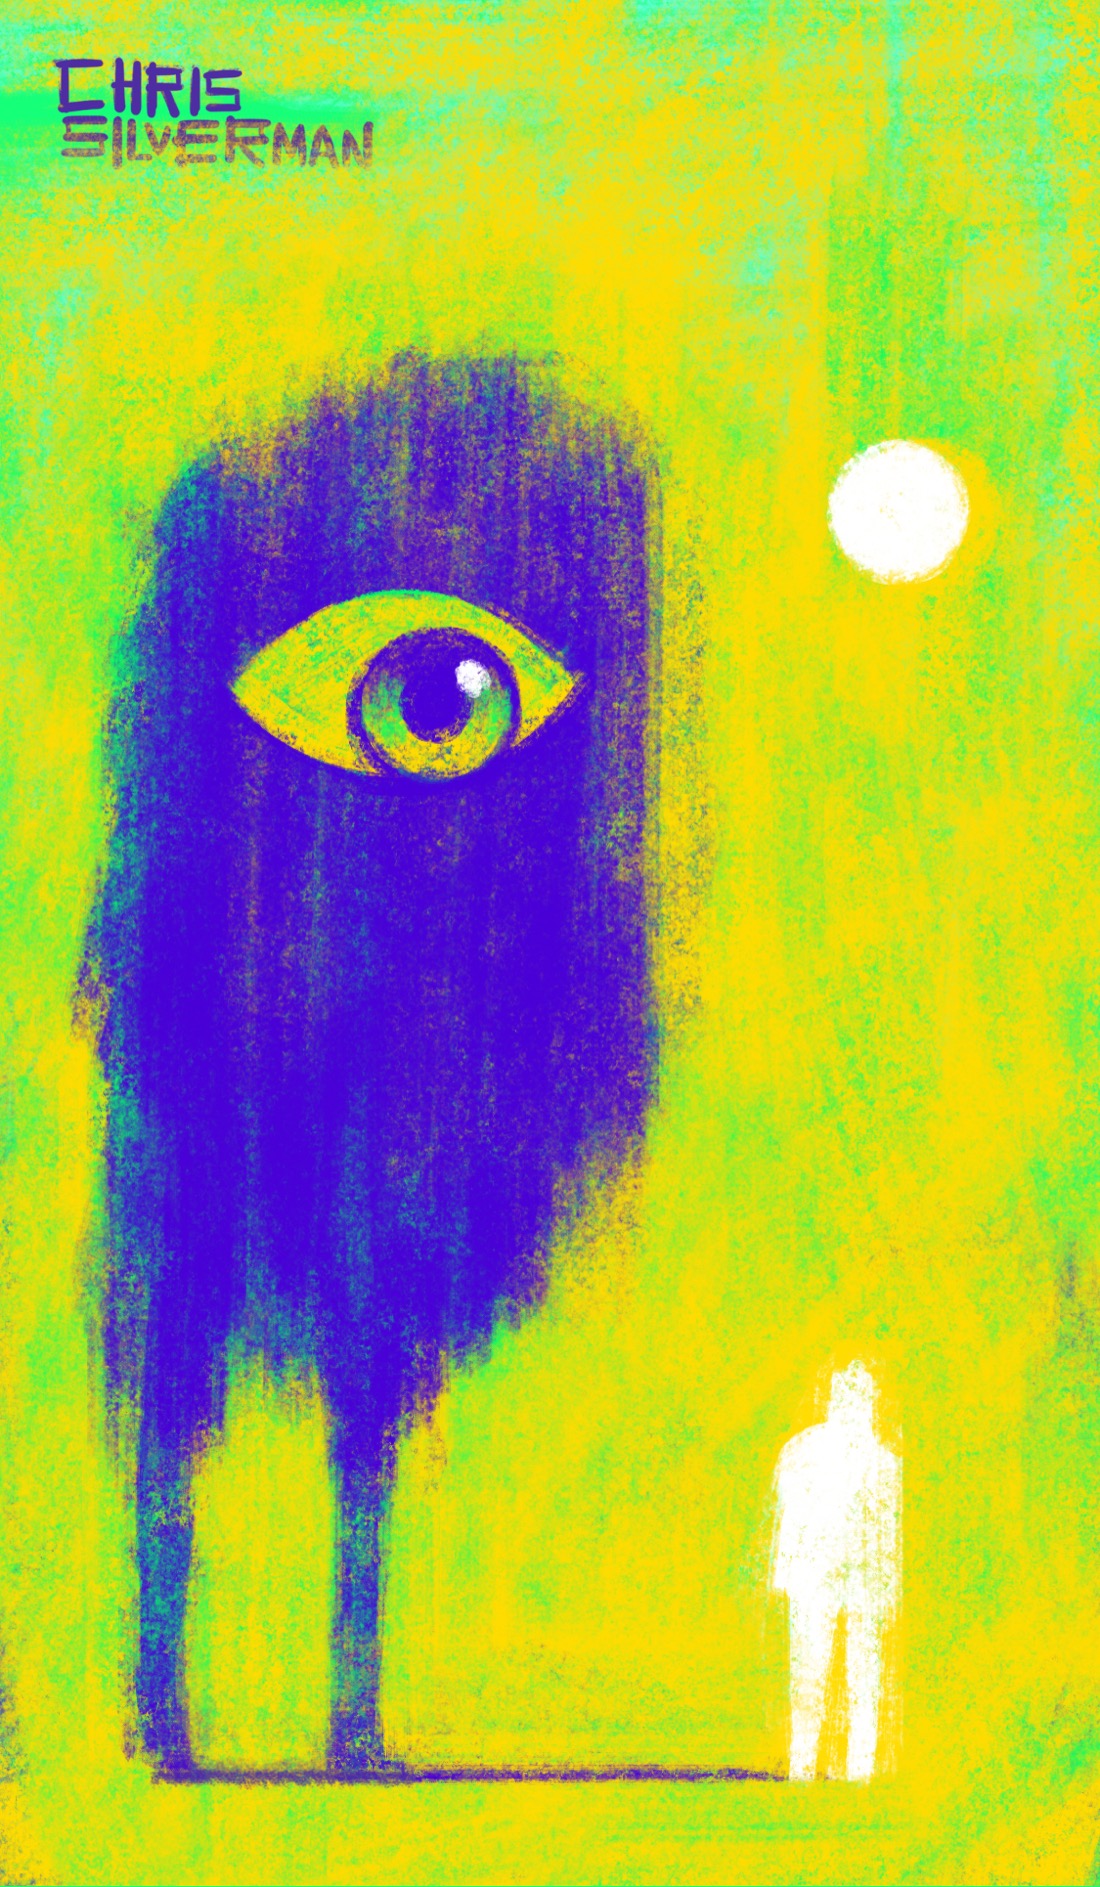 A small white figure stands on the right side of the drawing, casting a huge, shapeless purple shadow that looms over the figure on the left. The shadow has a single bright eye that is watching the figure. In the top right is a white circle that's either the sun or the moon. The background of the drawing is a mix of yellow and bright green.